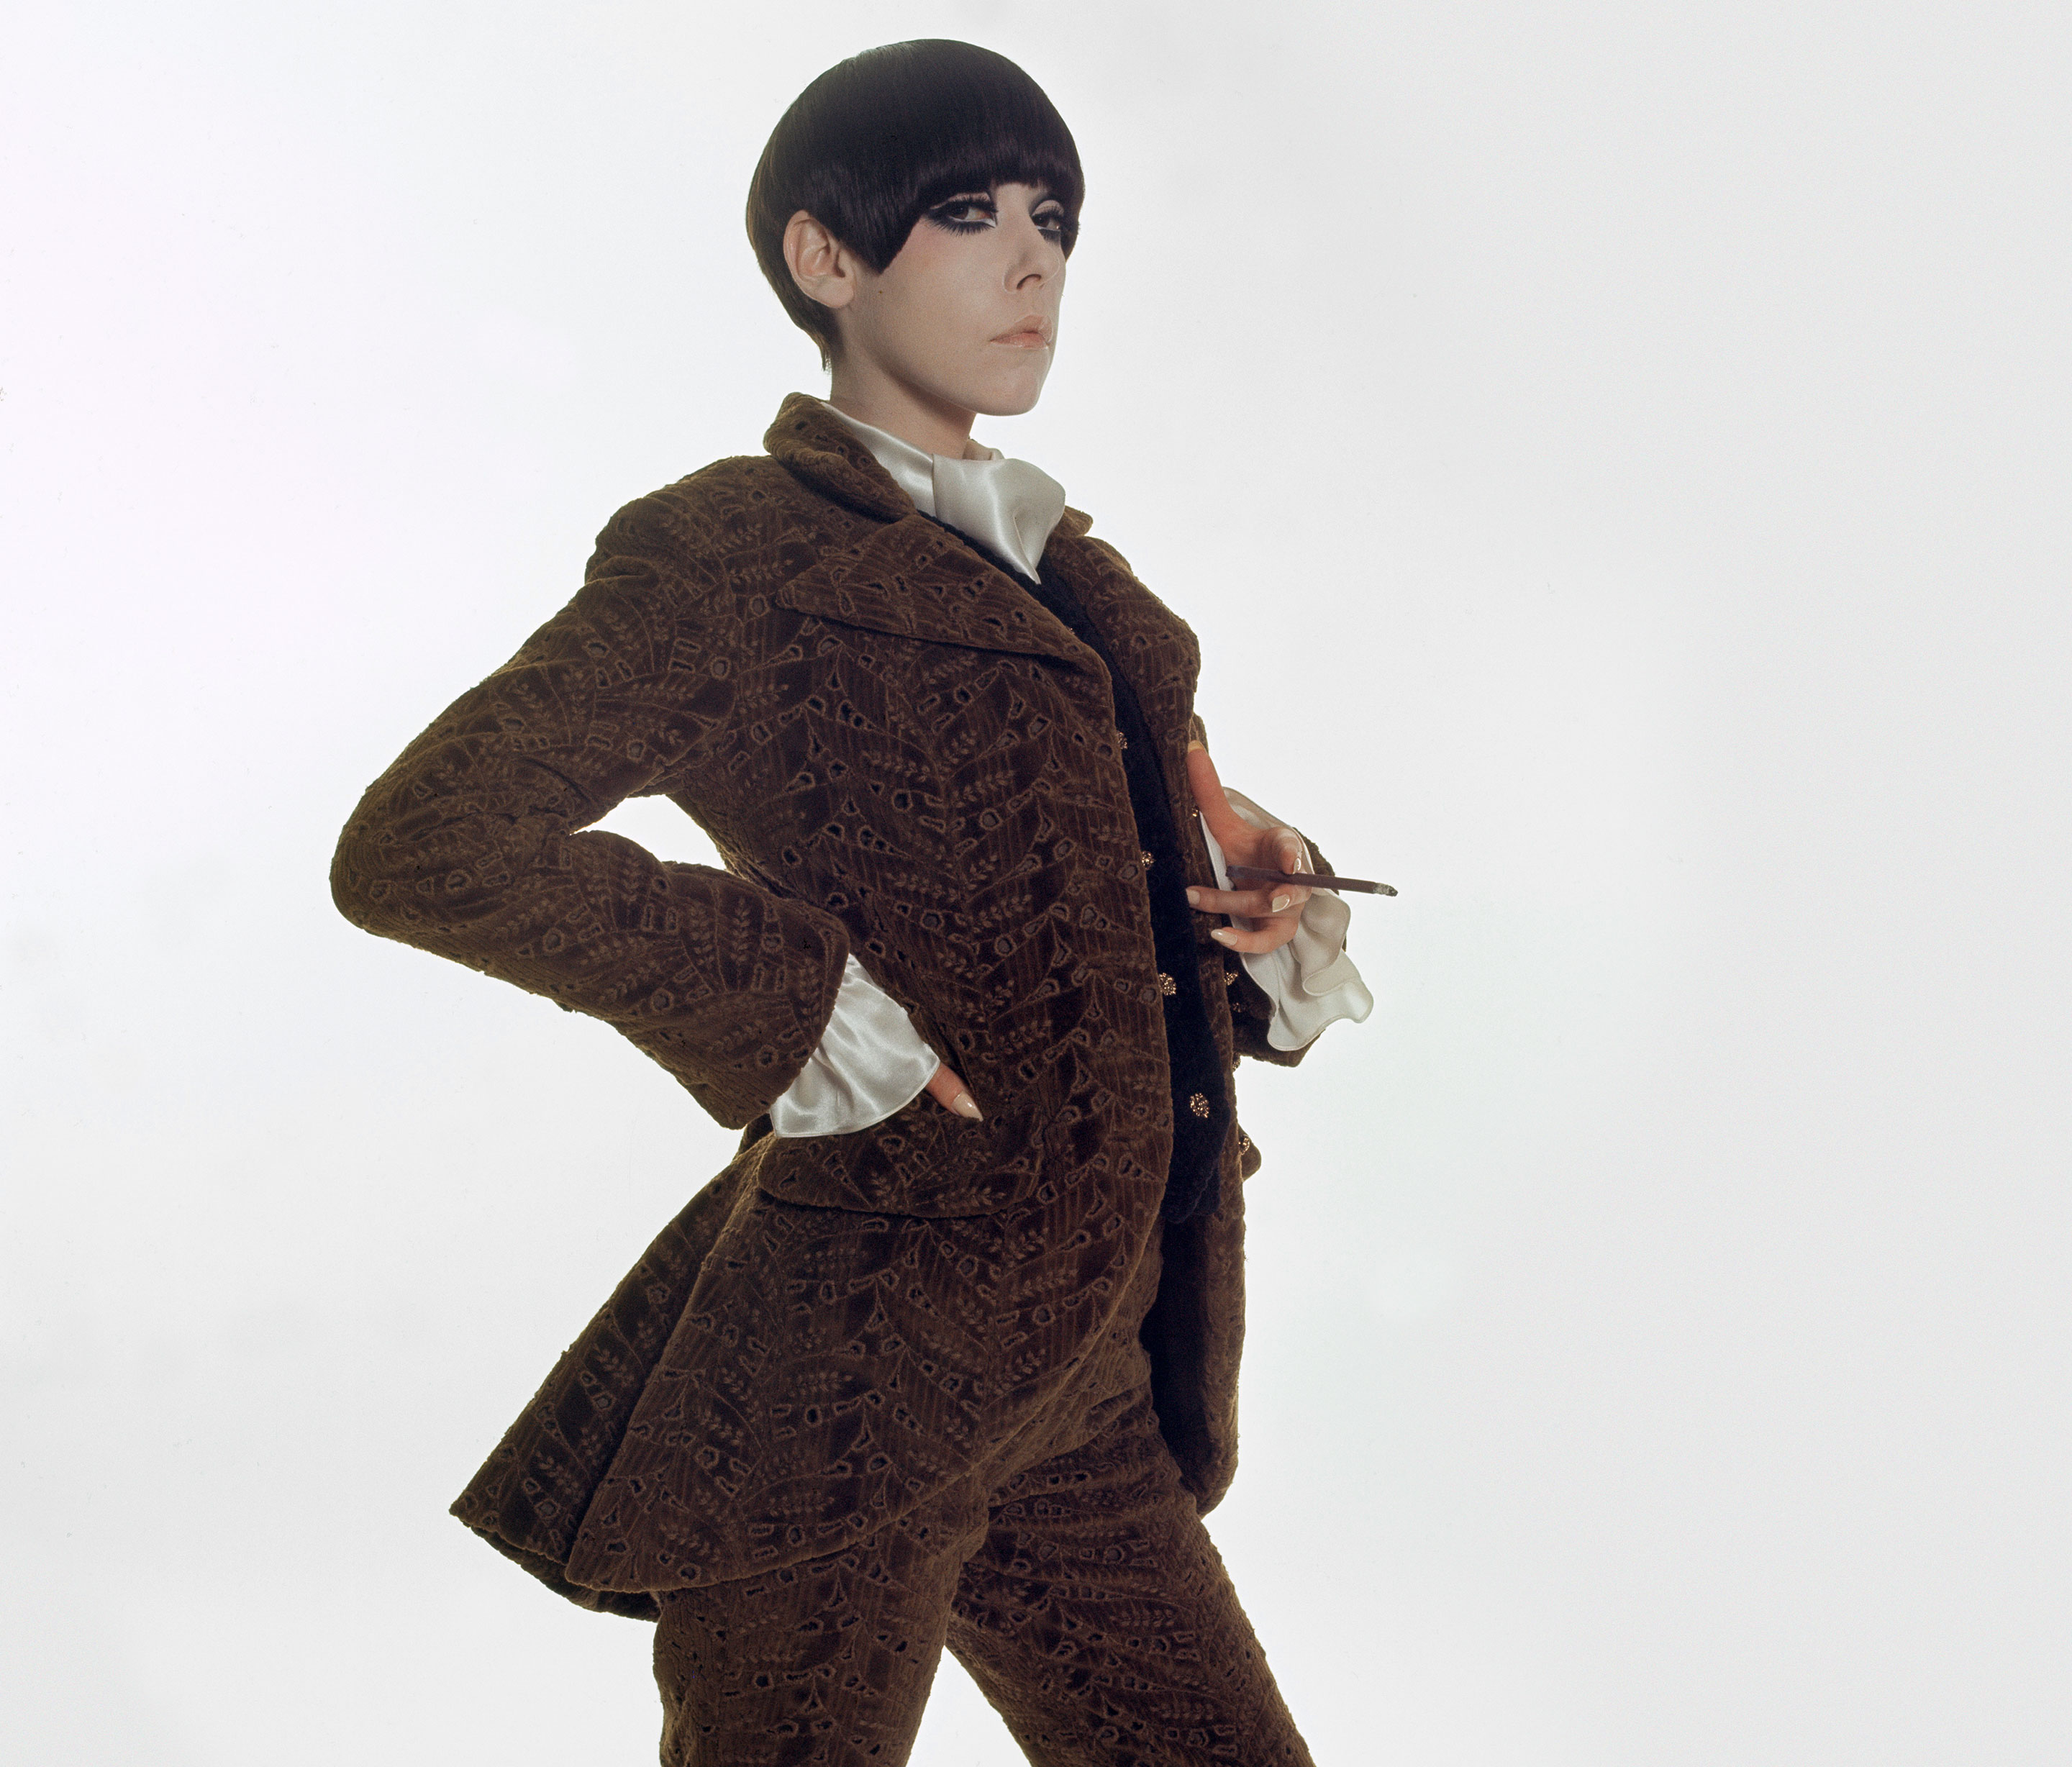 Peggy Moffitt modeling George Sand pantsuit designed by Rudi Gernreich, Fall 1967 Collection. Photograph © William Claxton, LLC, courtesy of Demont Photo Management & Fahey/Klein Gallery Los Angeles, with permission of the Rudi Gernreich trademark.